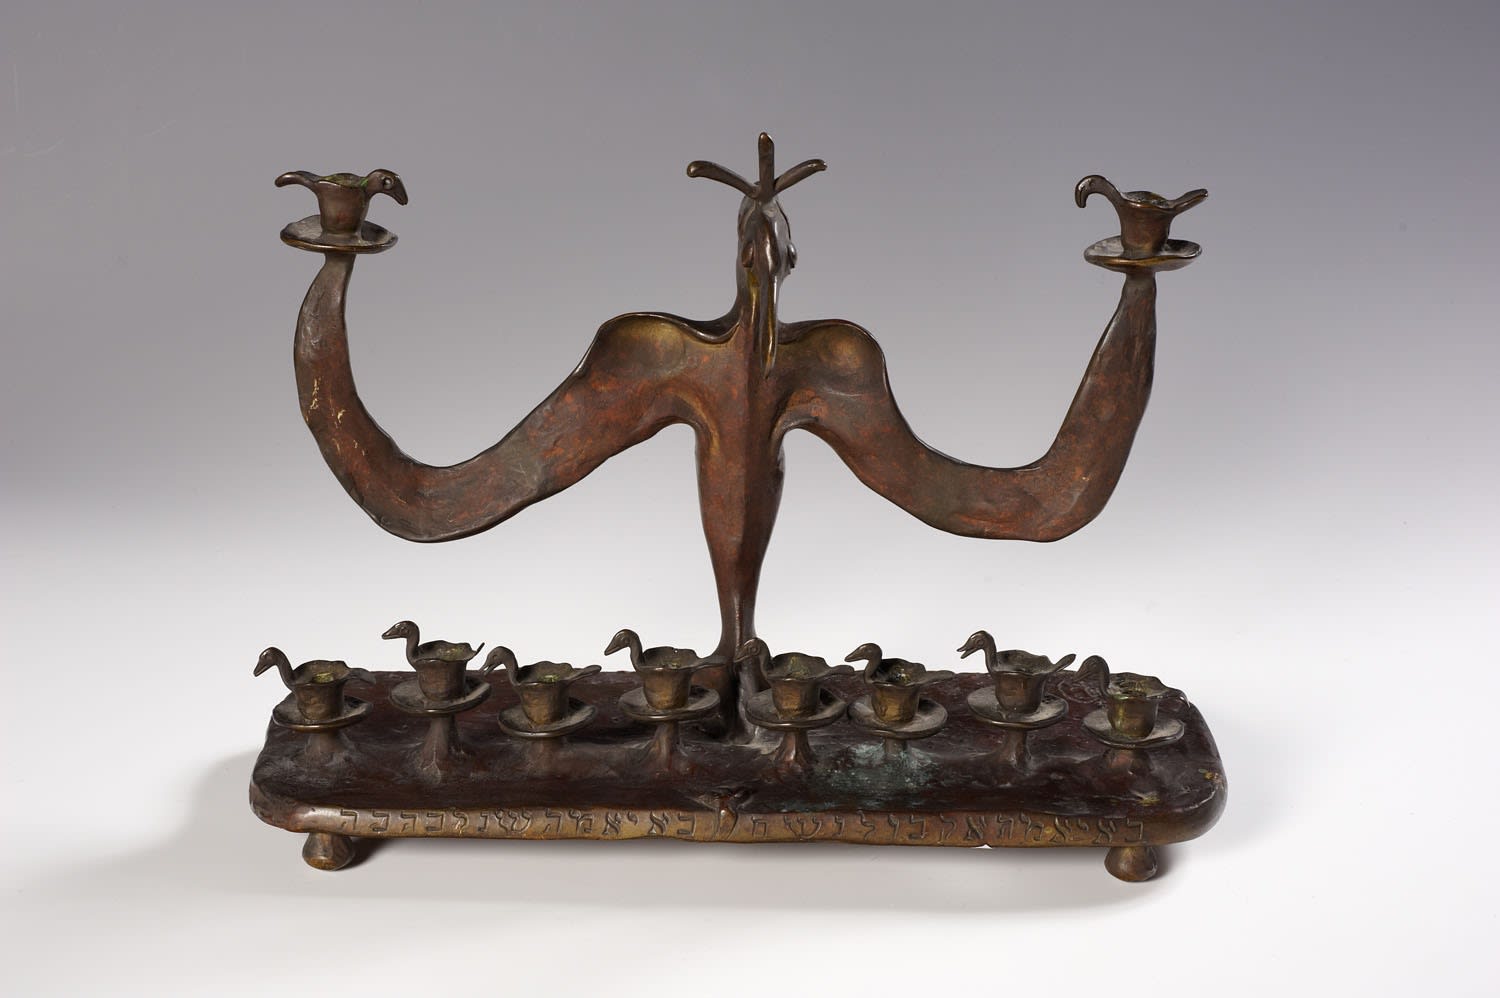 Moshe Oved (1885-1958) Chanukiah with Doves n.d. Bronze 27 x 38 x 16 cm Ben Uri Collection © Moshe Oved estate To see and discover more about this artist click here